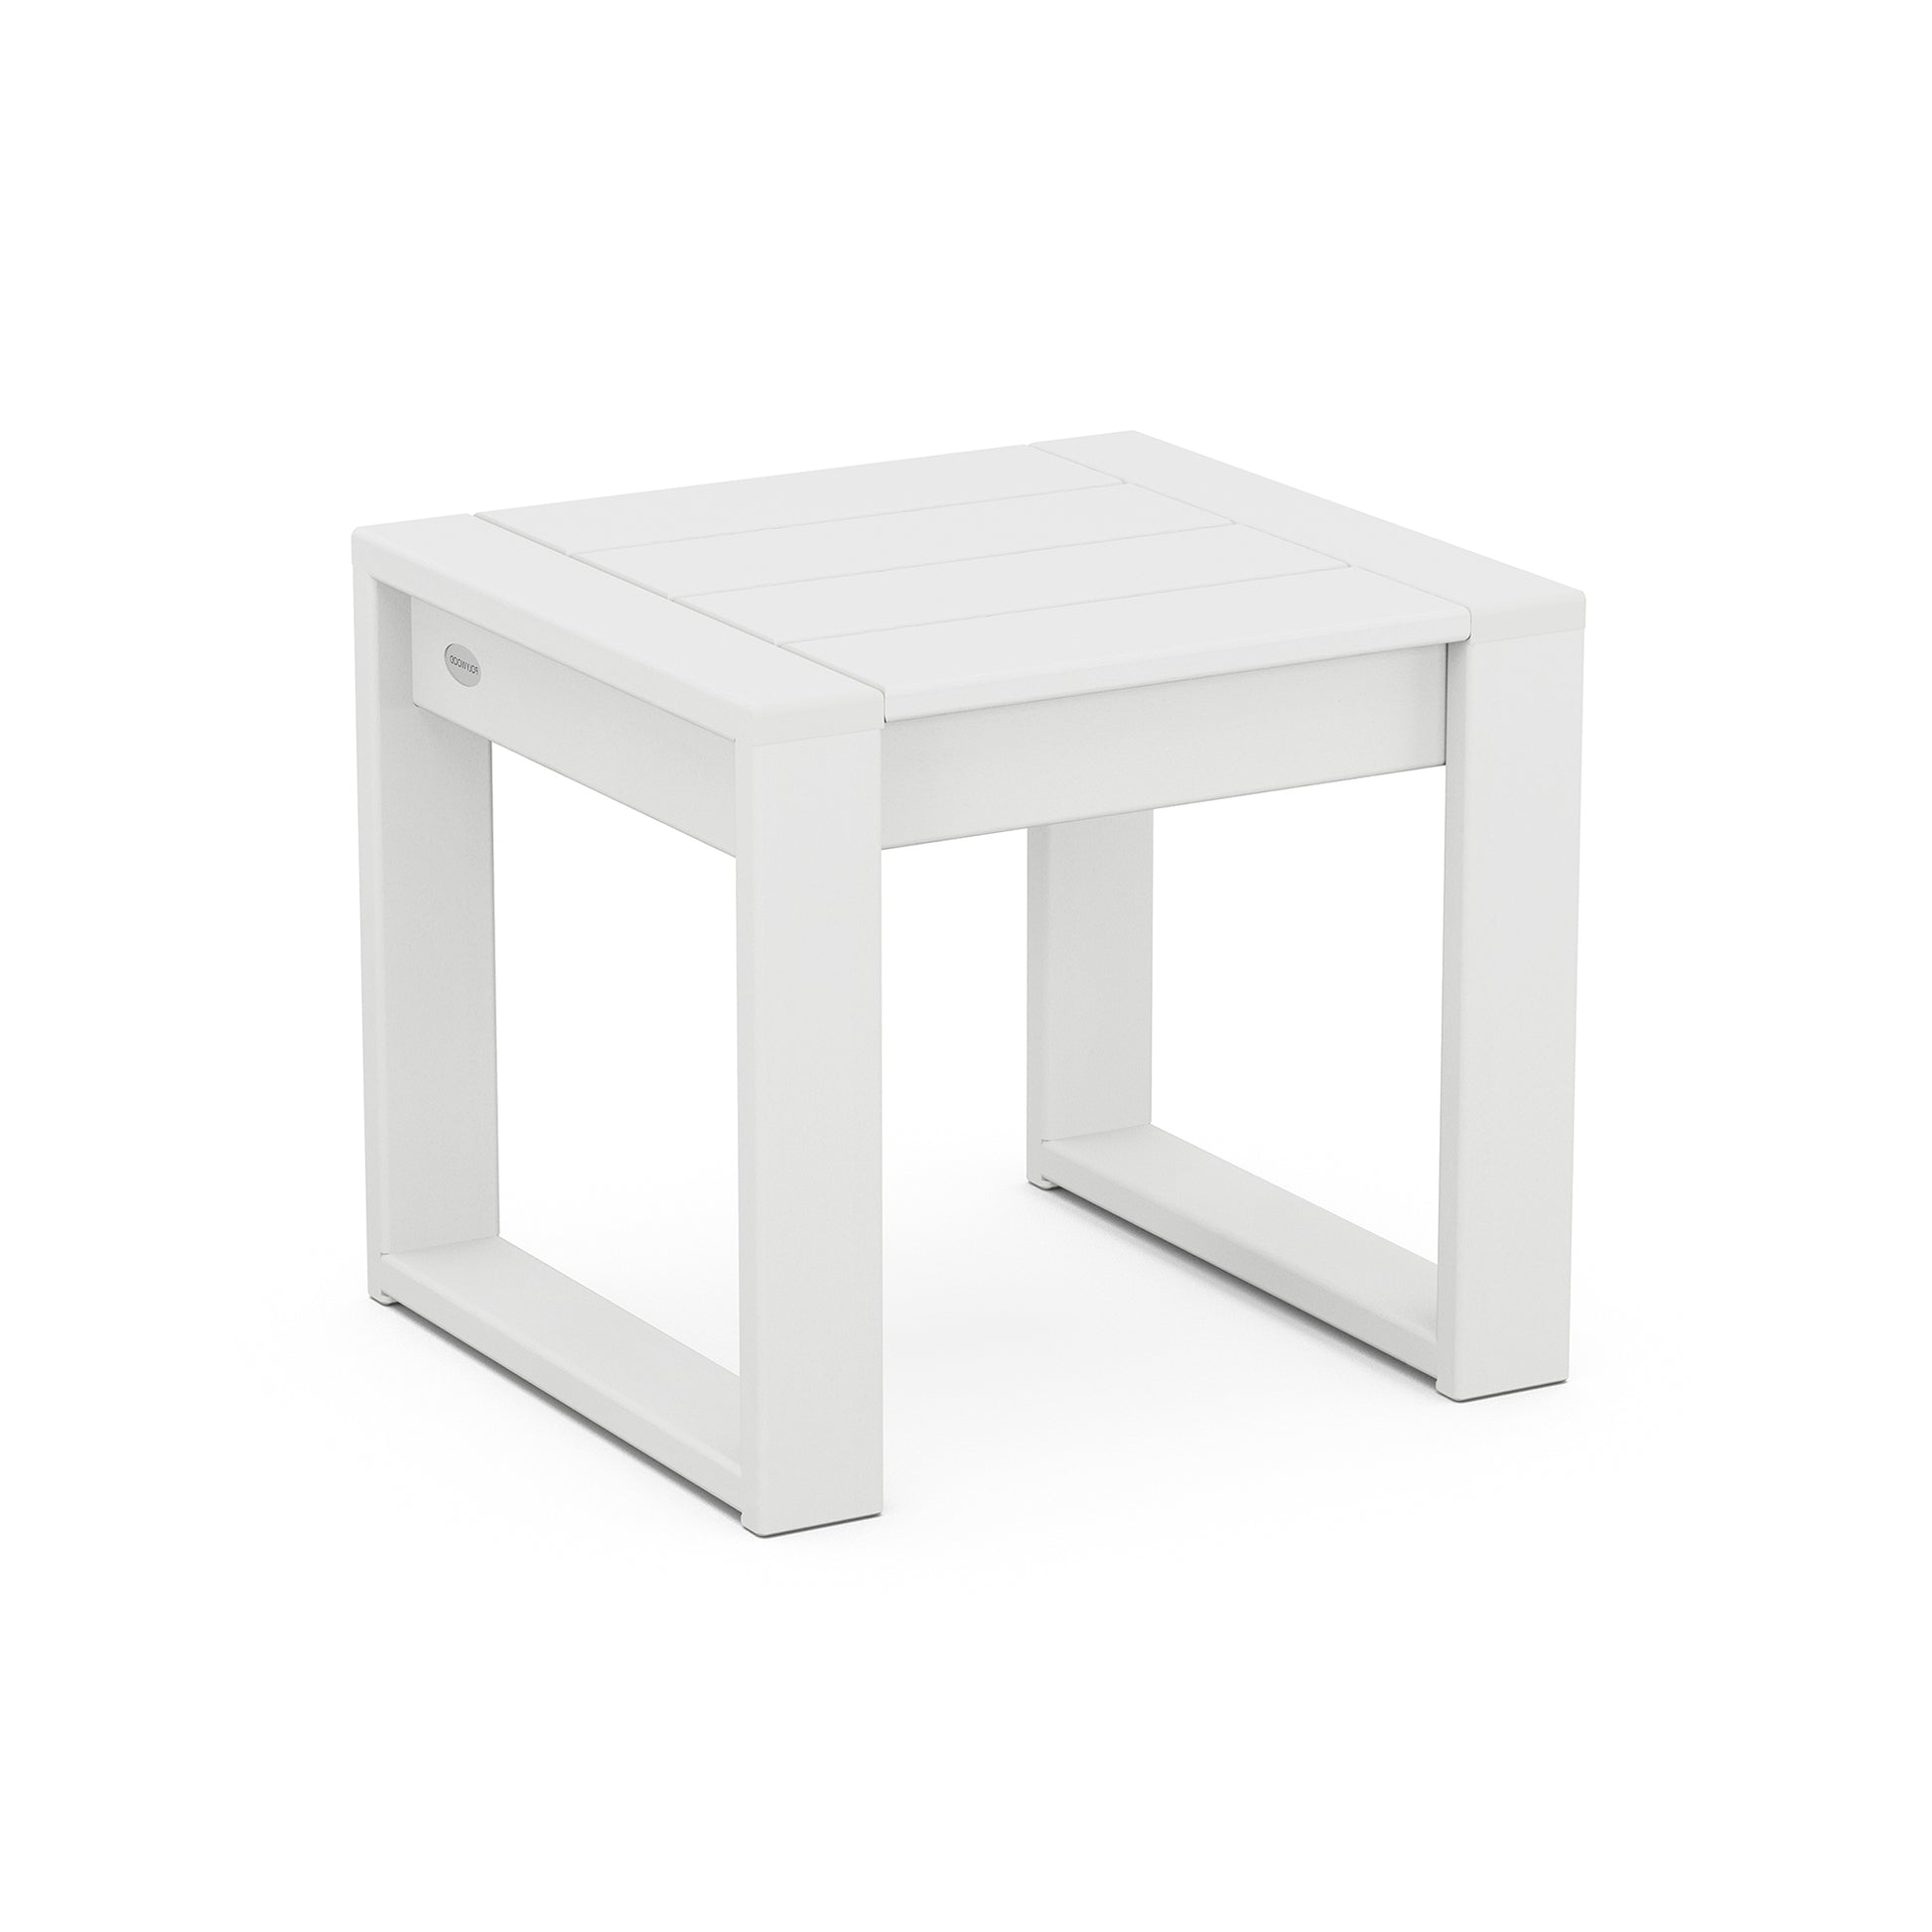 A simple white POLYWOOD EDGE End Table with a square top and a lower shelf, featuring clean lines and minimalist design, isolated on a white background.